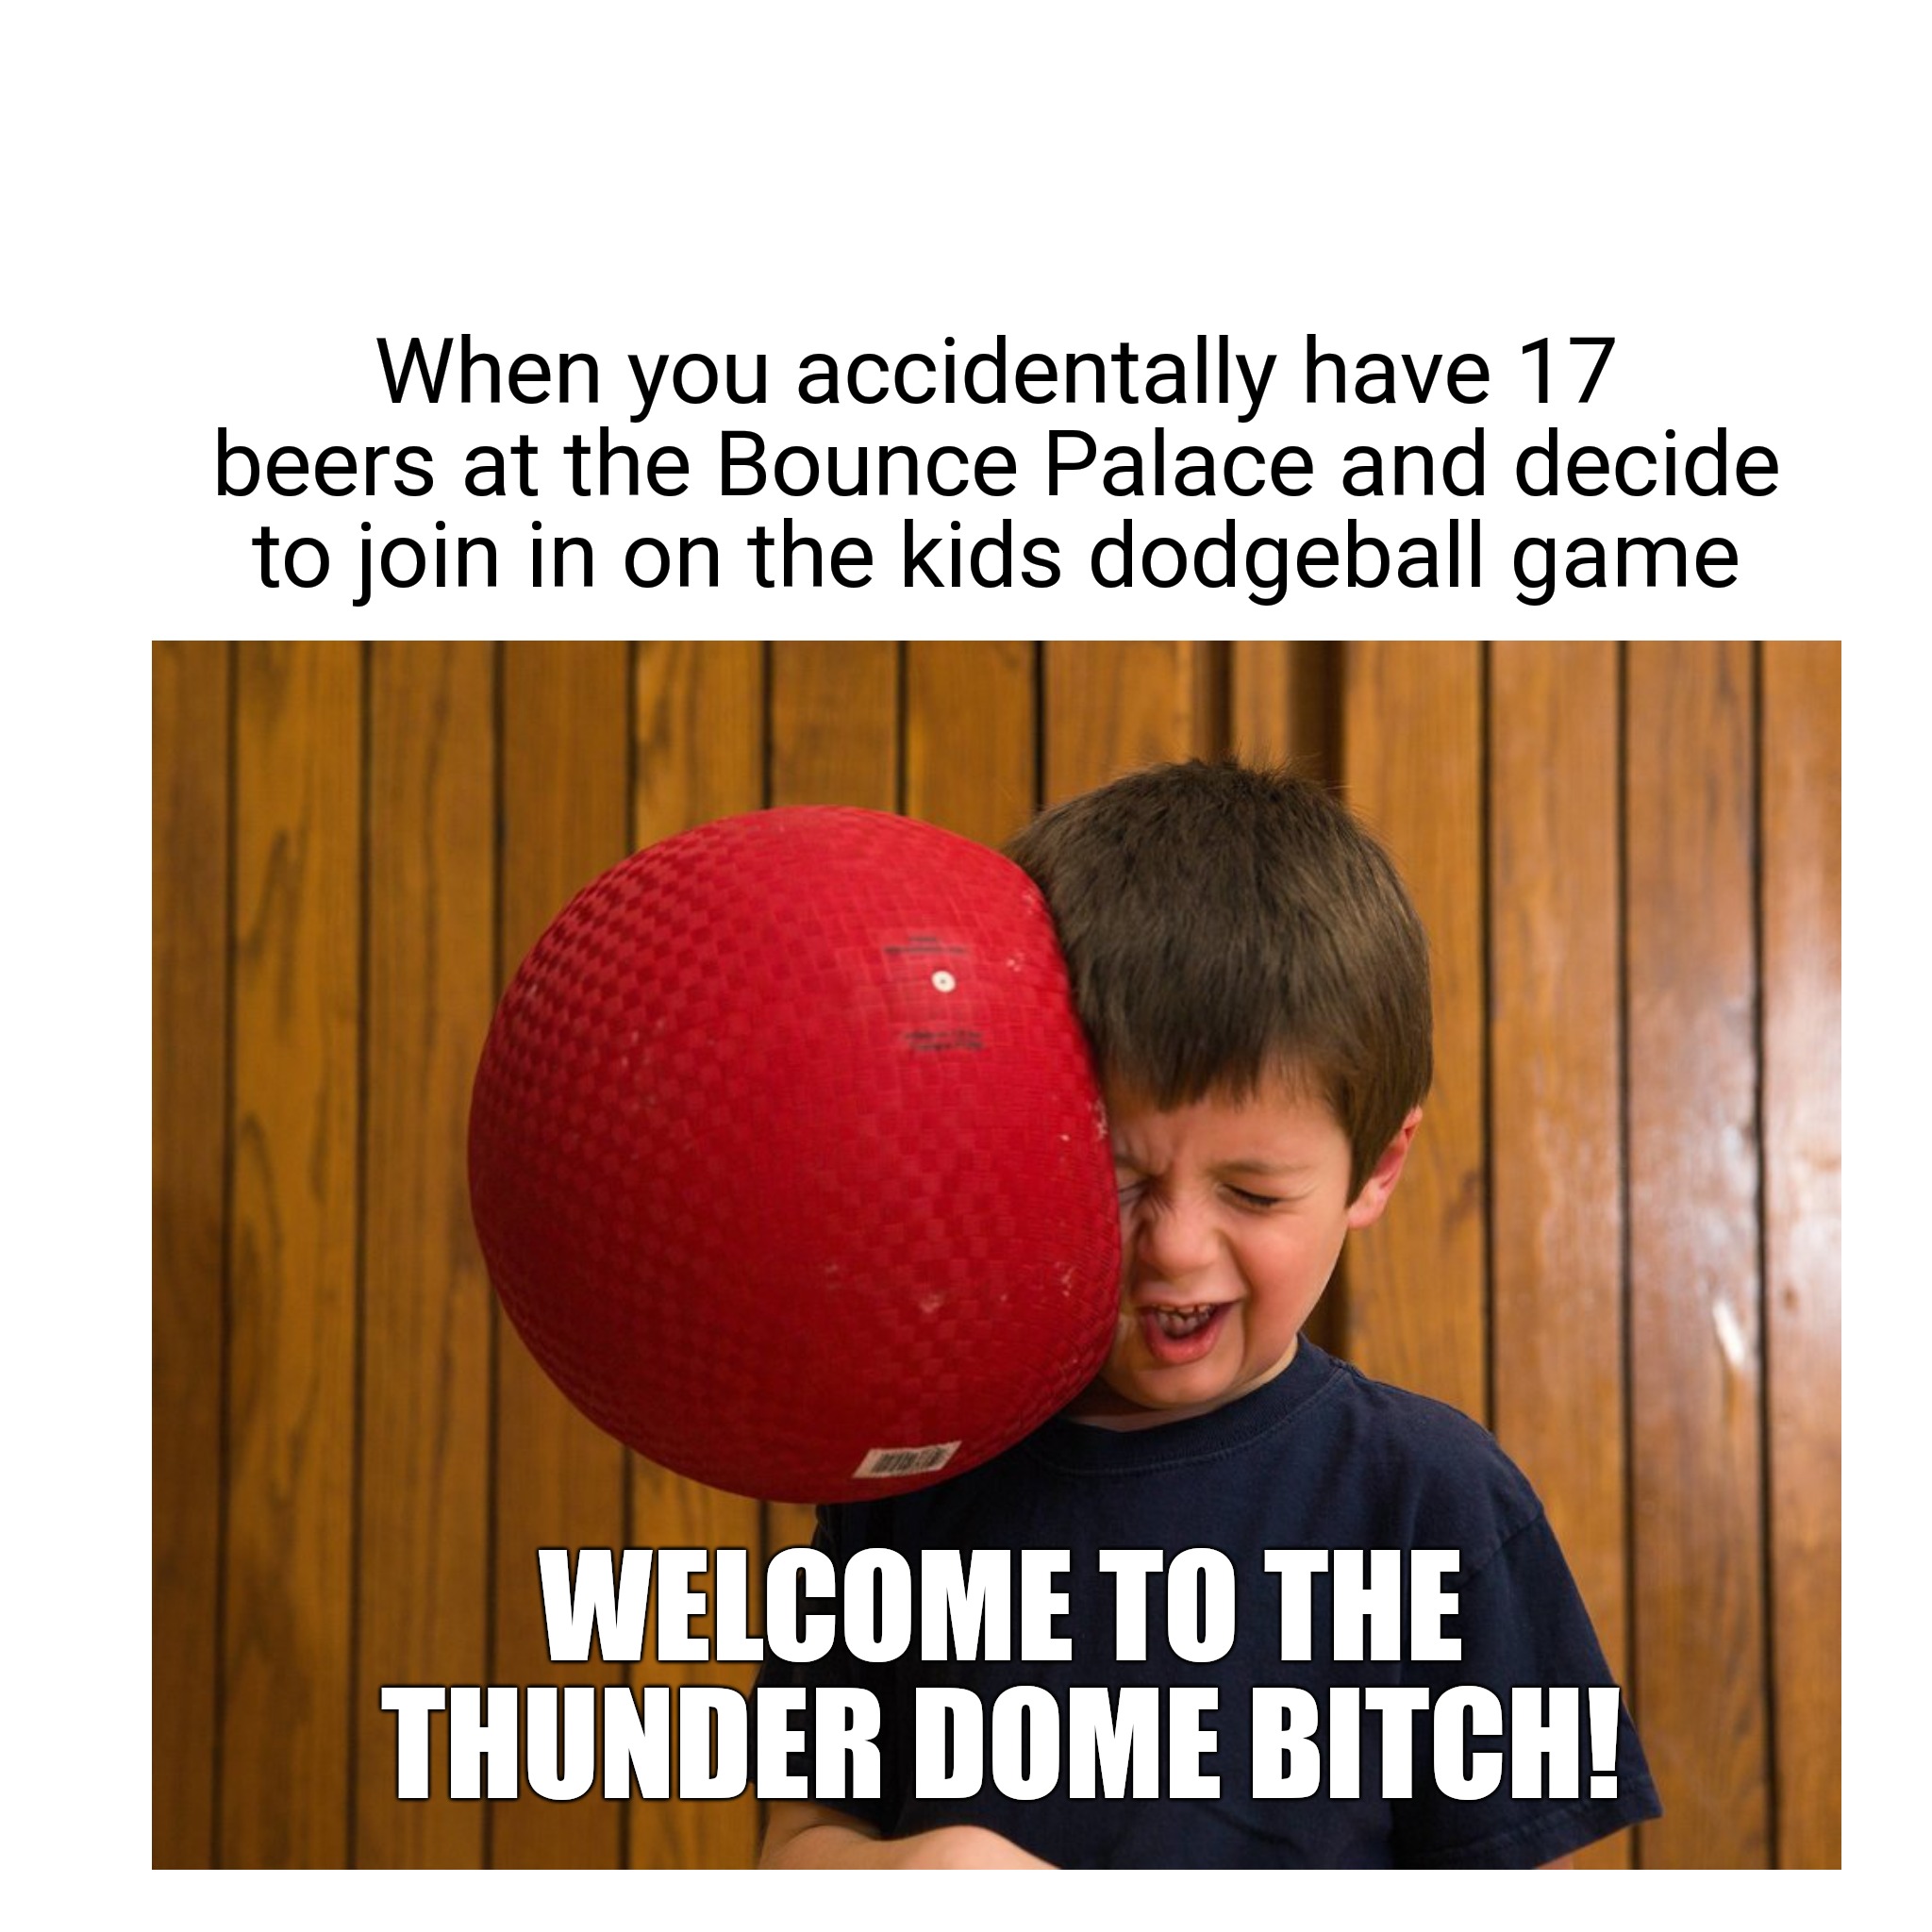 When you accidentally have 17 beers at the Bounce Palace and decide to join in on the kids dodgeball game; WELCOME TO THE THUNDER DOME BITCH! | image tagged in dodgeball | made w/ Imgflip meme maker